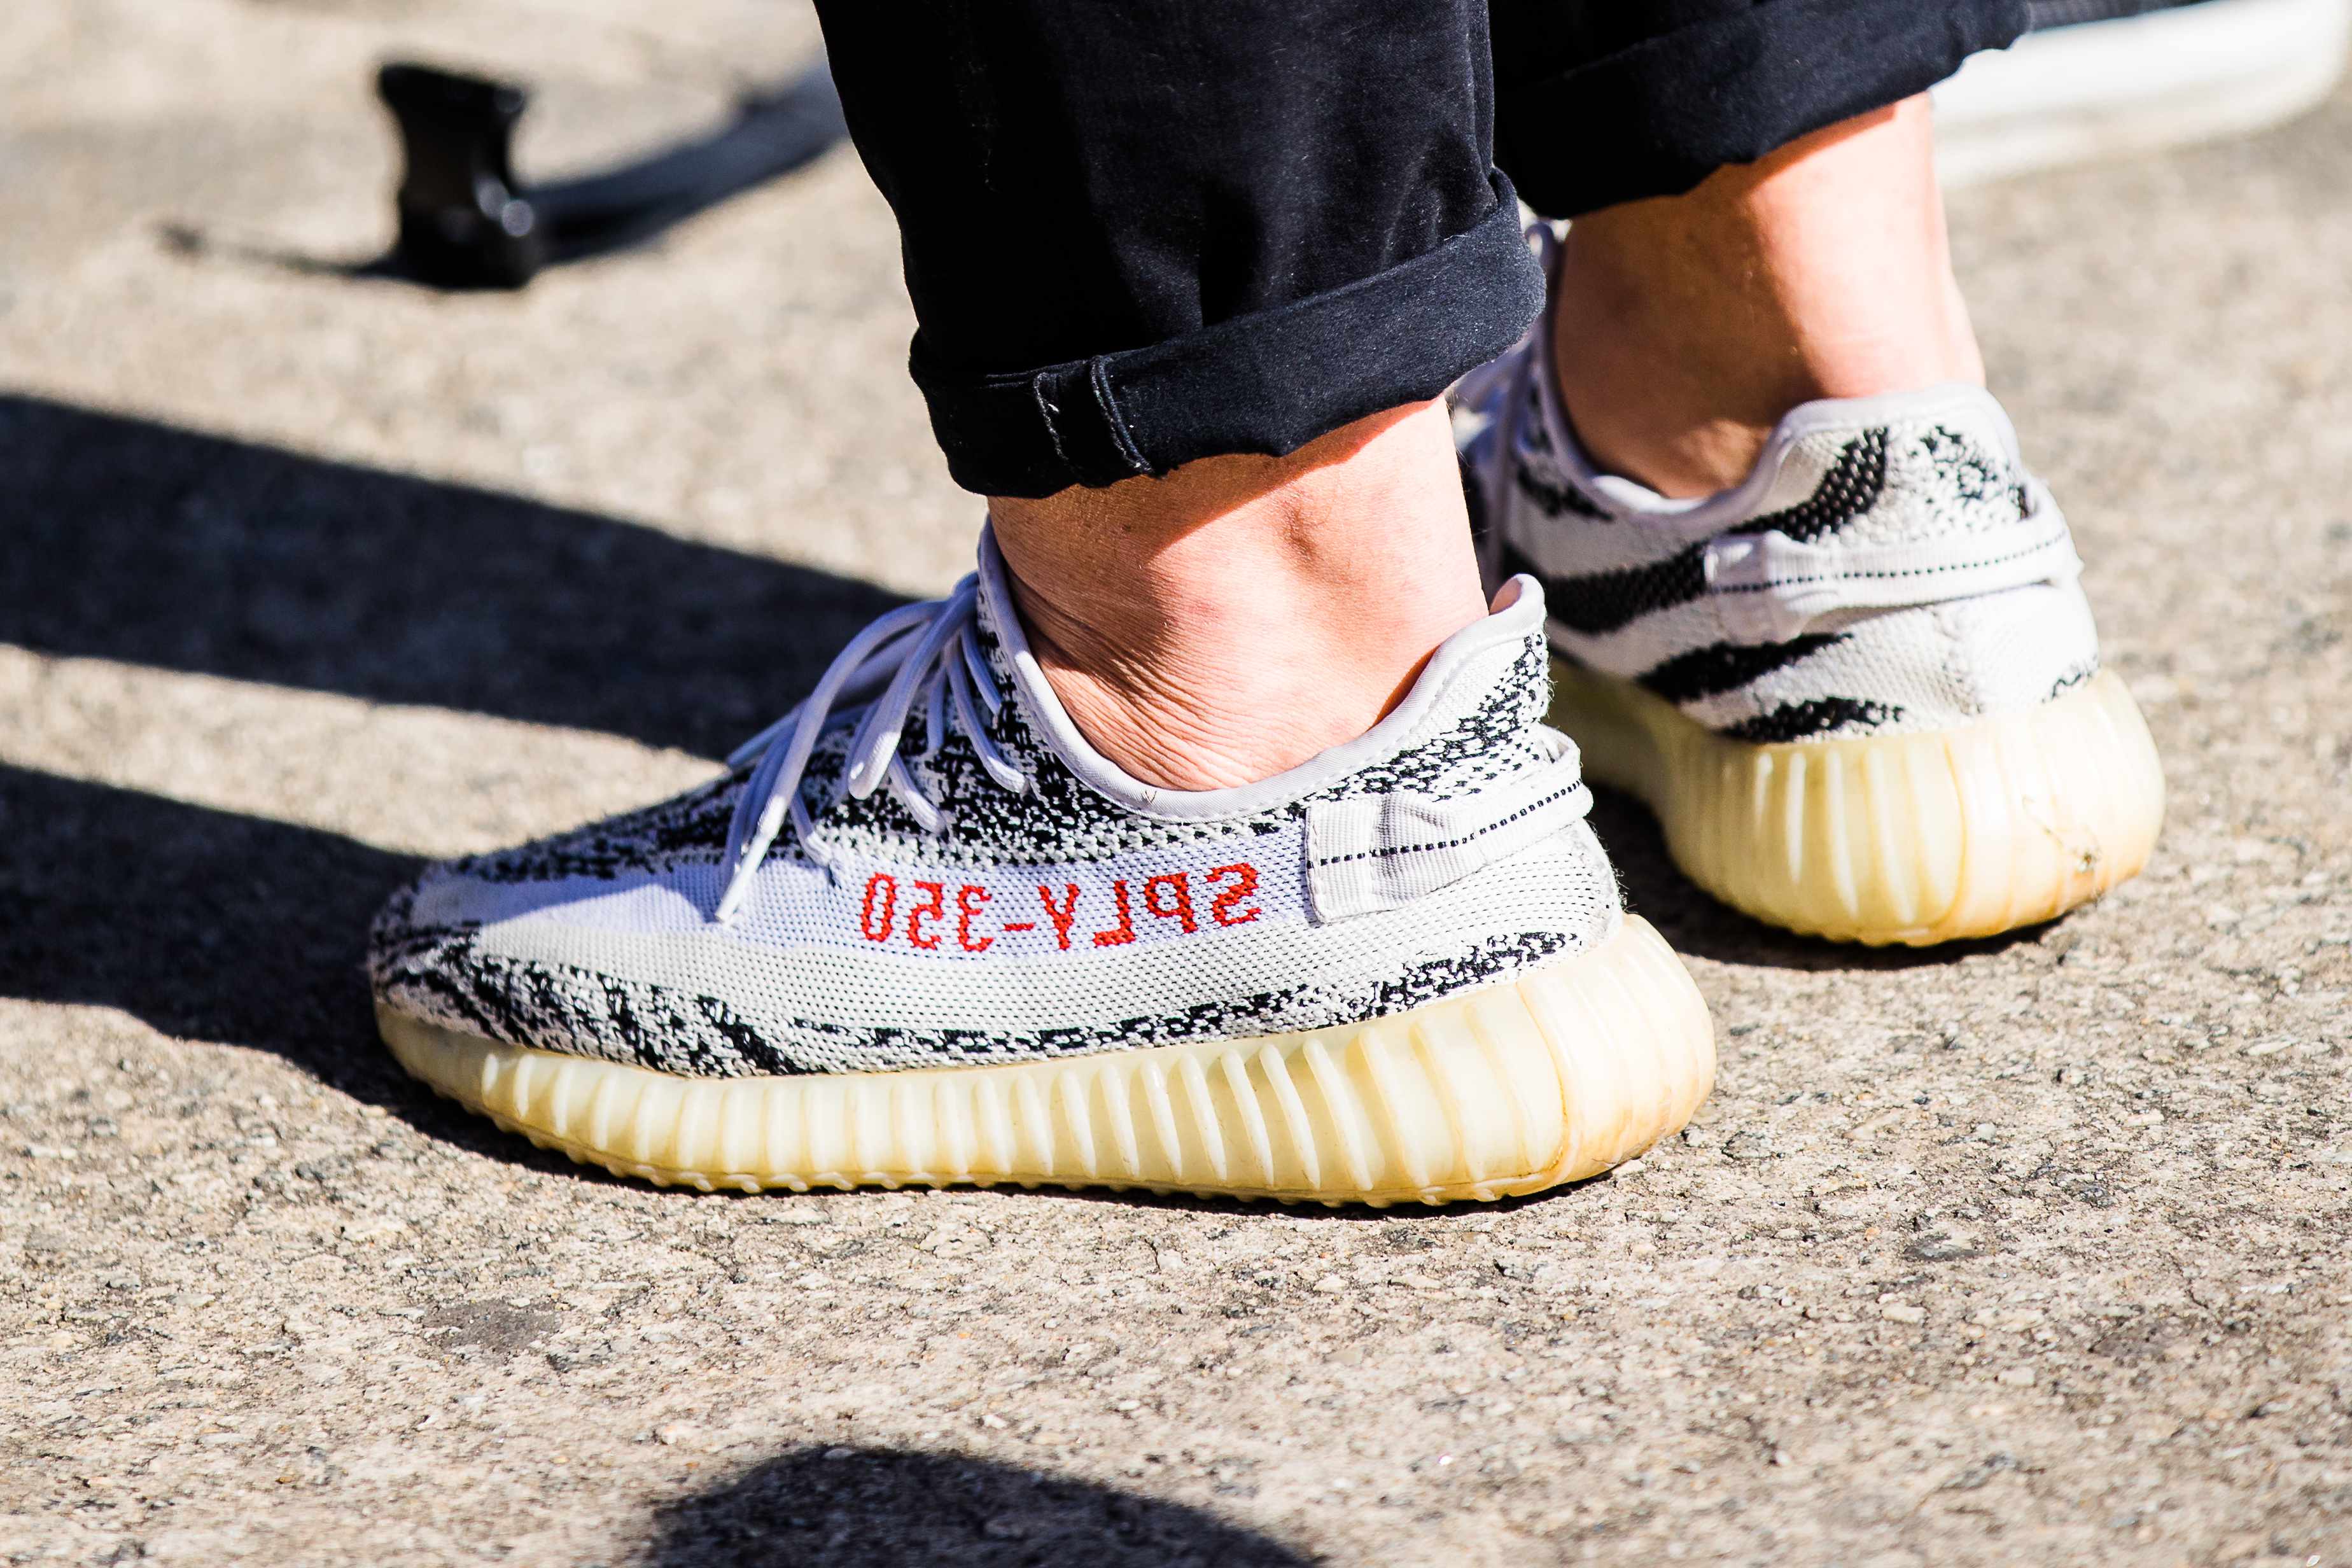 Adidas says it will relaunch Kanye West's shoe designs without the Yeezy  name